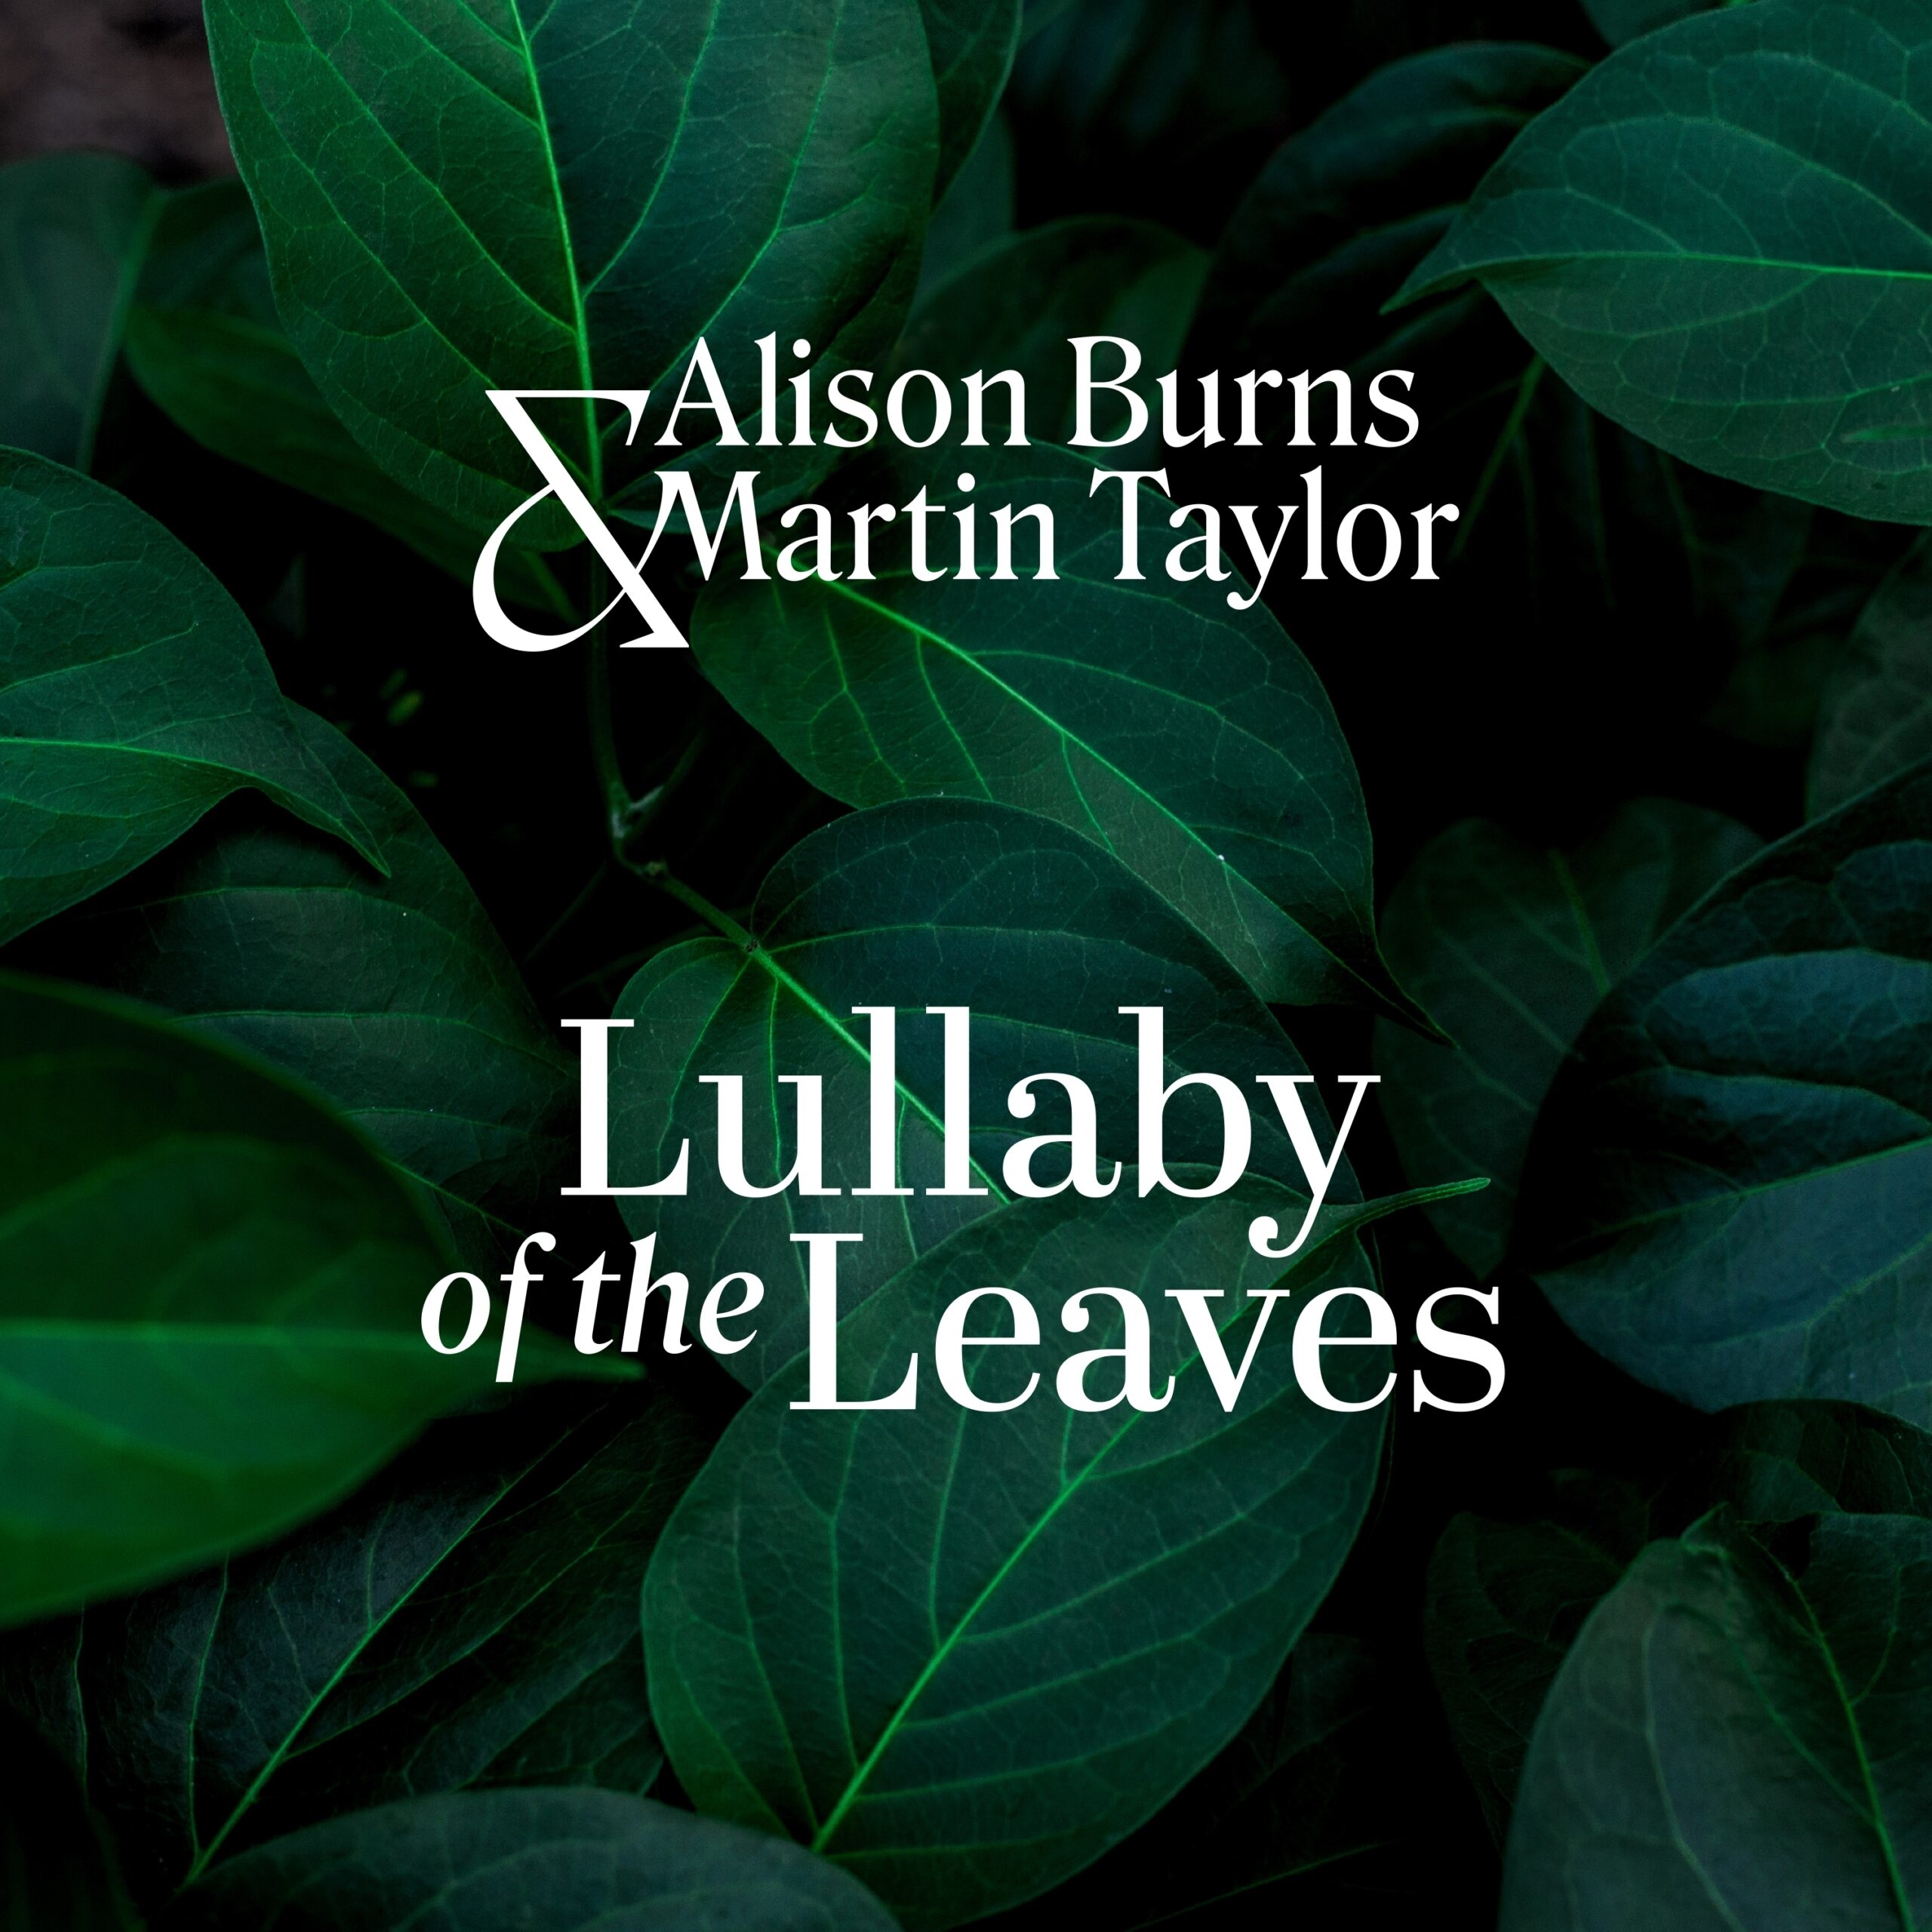 Lullaby of the Leaves by Alison Burns and Martin Taylor